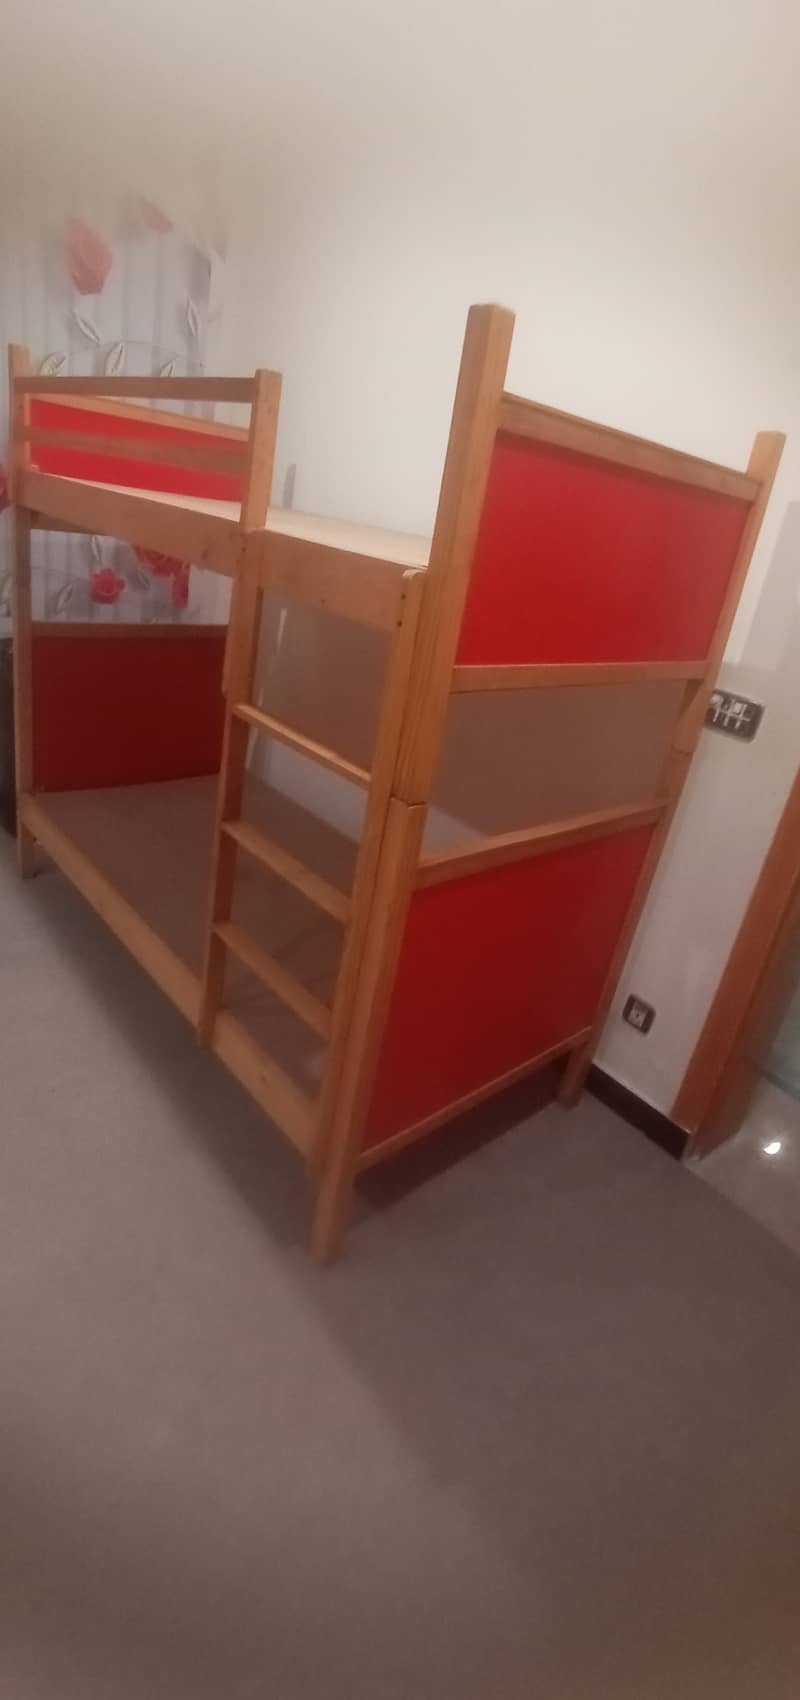 Bunker bed with mattress for sale 3